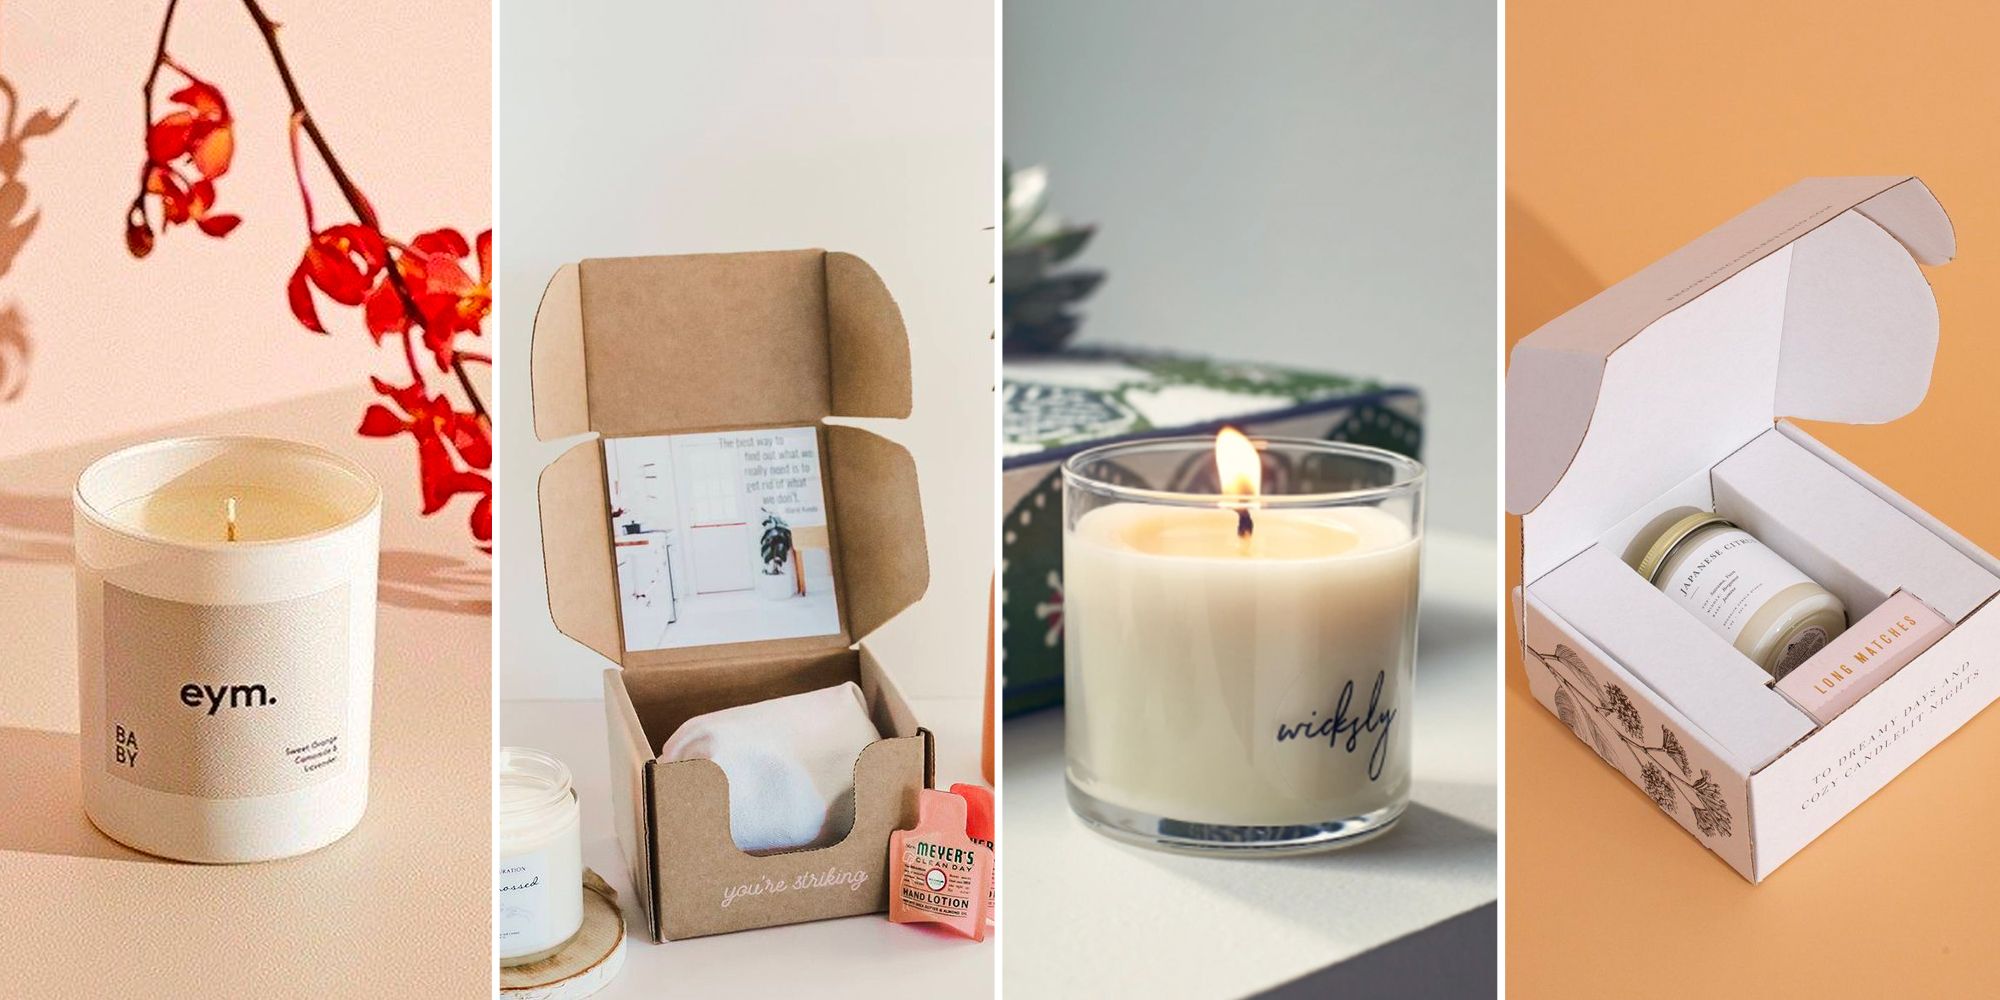 11 Best Candle Subscription Boxes 2022 - Monthly Candle Boxes